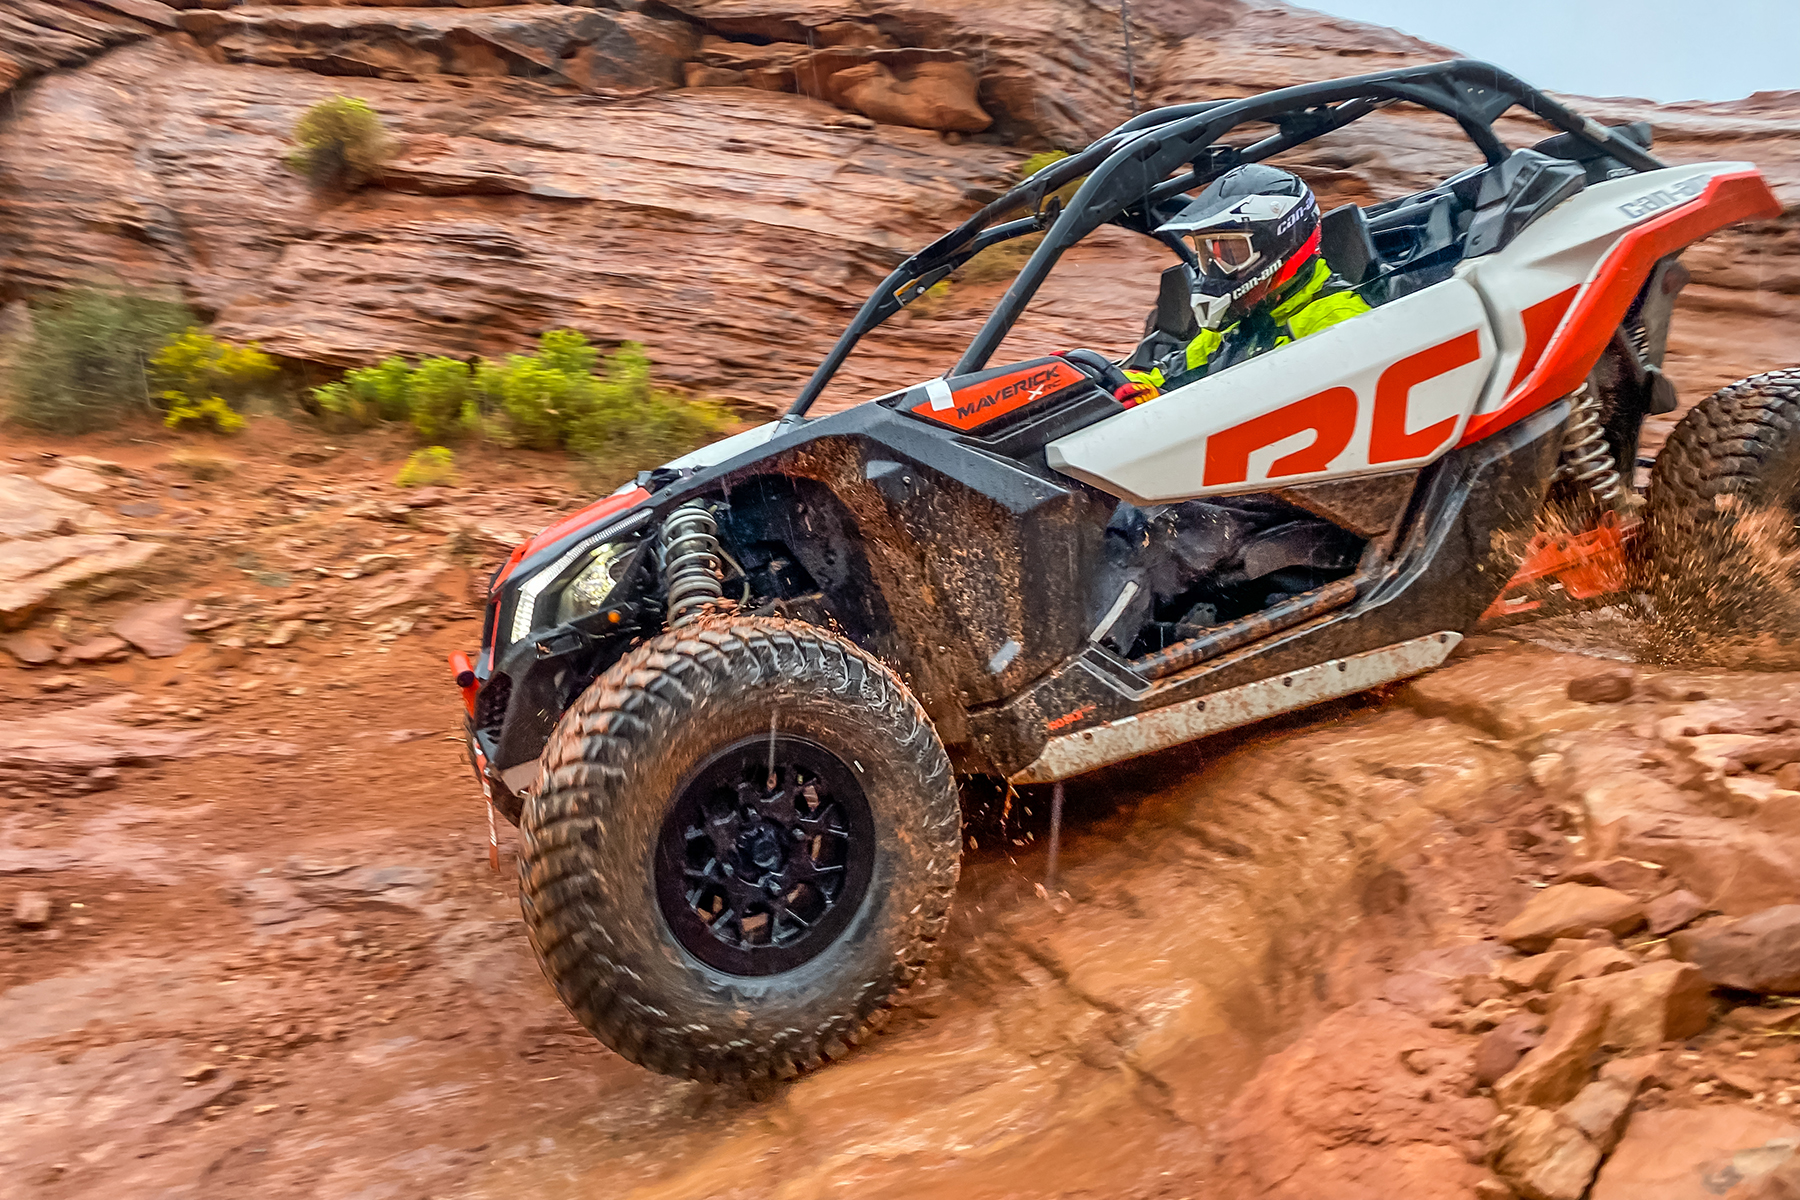 Can-Am drives down steep slippery rocks at International Off Road Day in Sand Hollow State Park at Trail Hero.